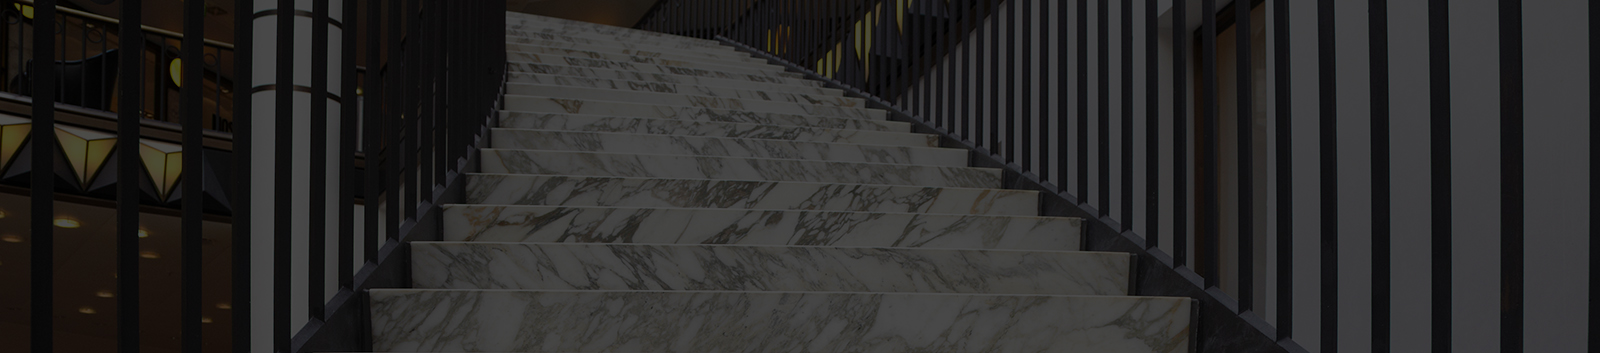 Stone Surfaces